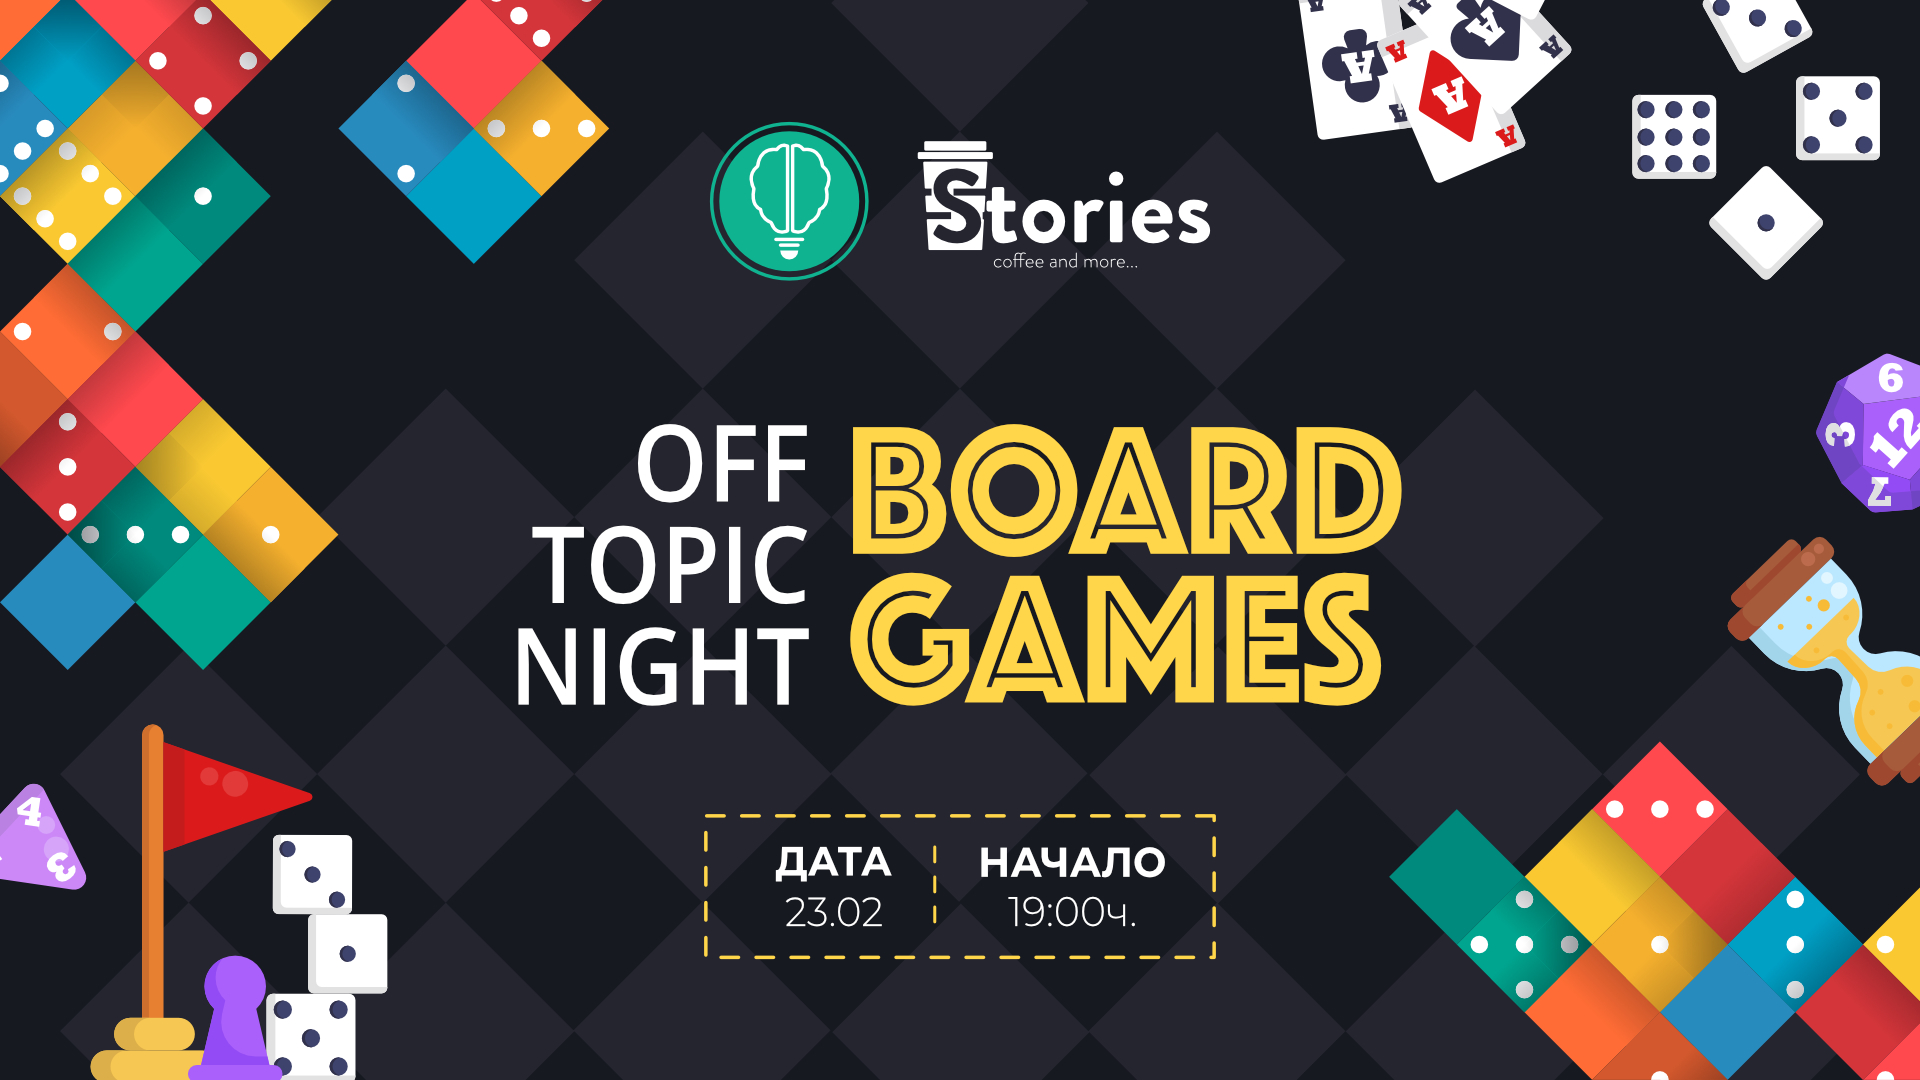 OFF Topic | Board Games Night 7 | Innovator Coworking Space